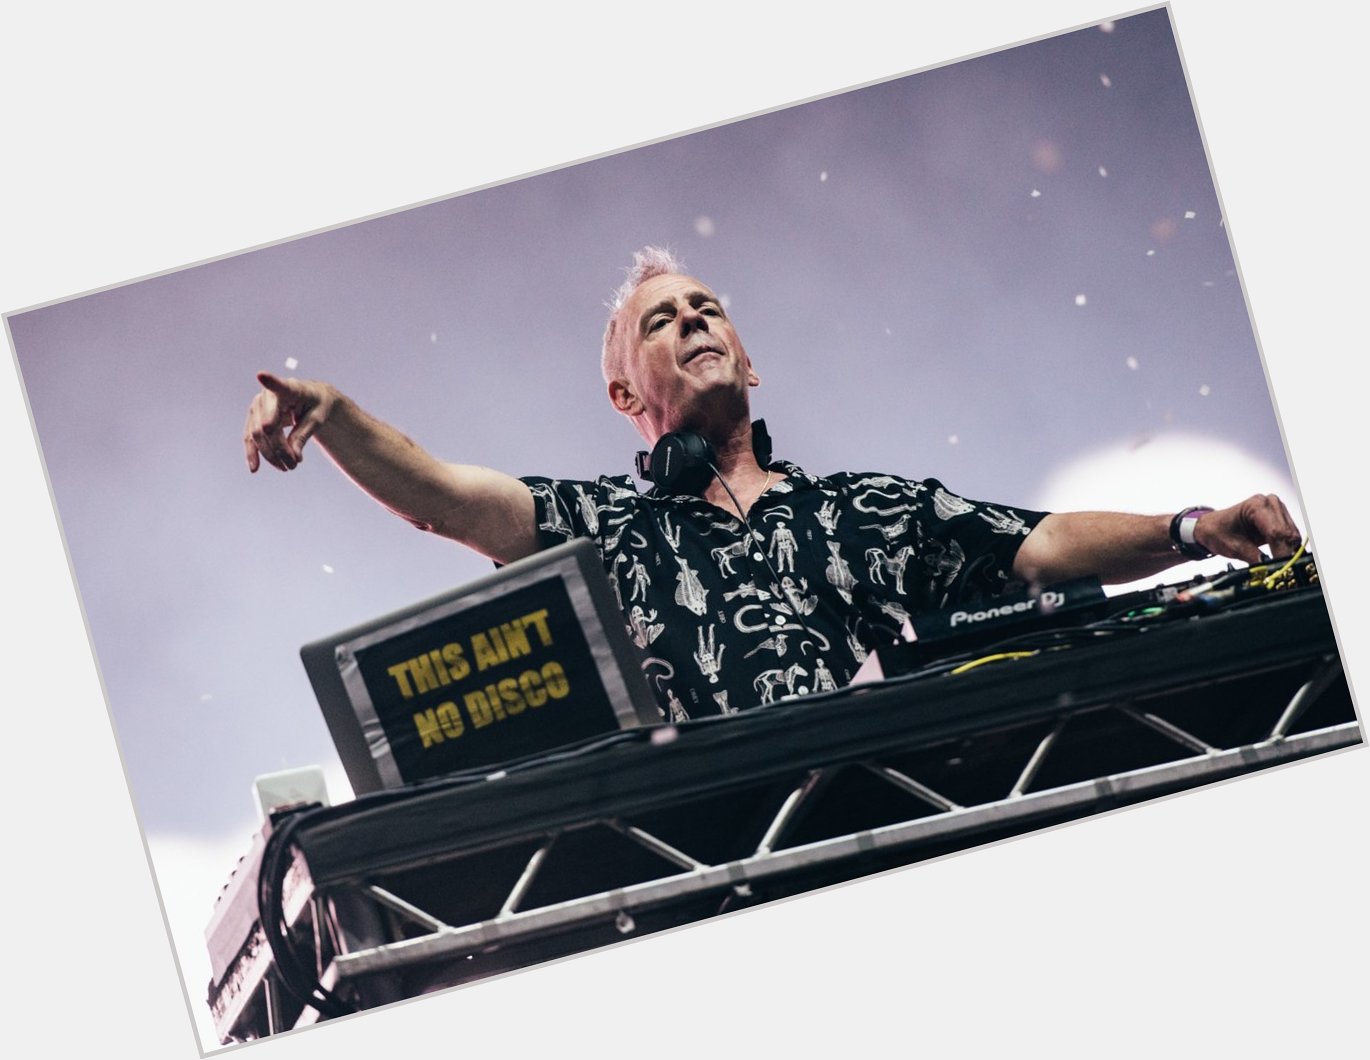 Happy birthday wishes today go out to Norman Fatboy Slim Cook! 